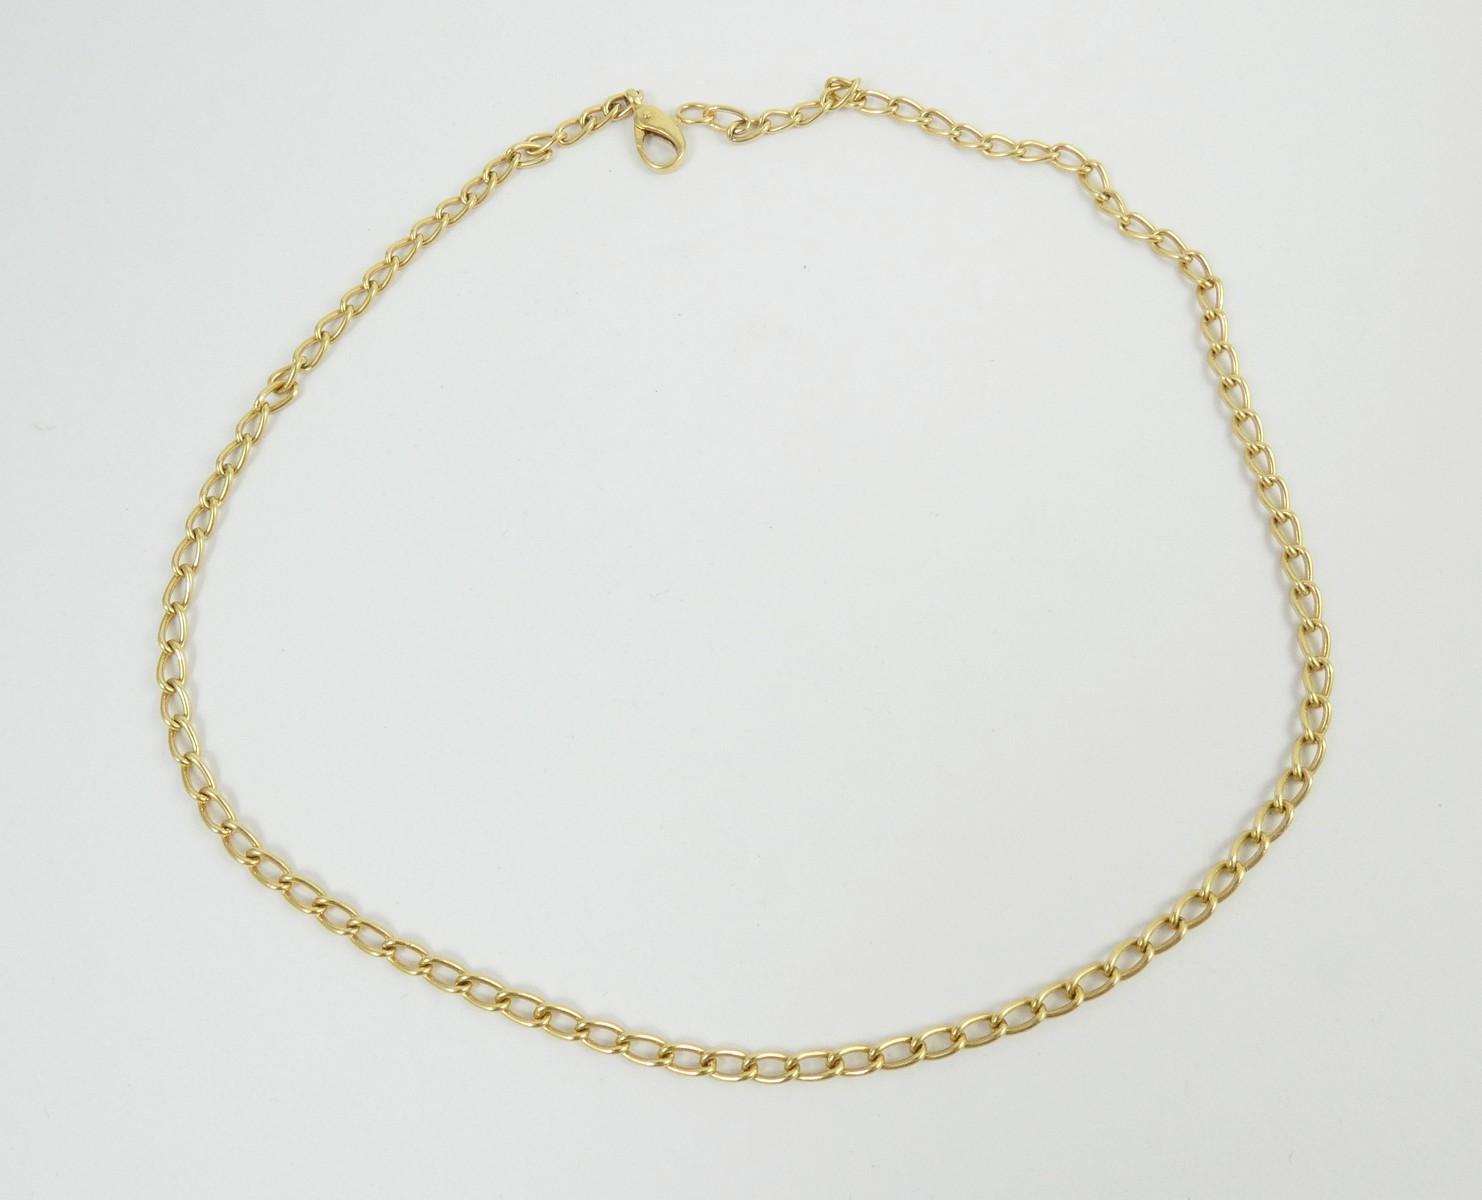 VALUABLE GOLD CHAIN